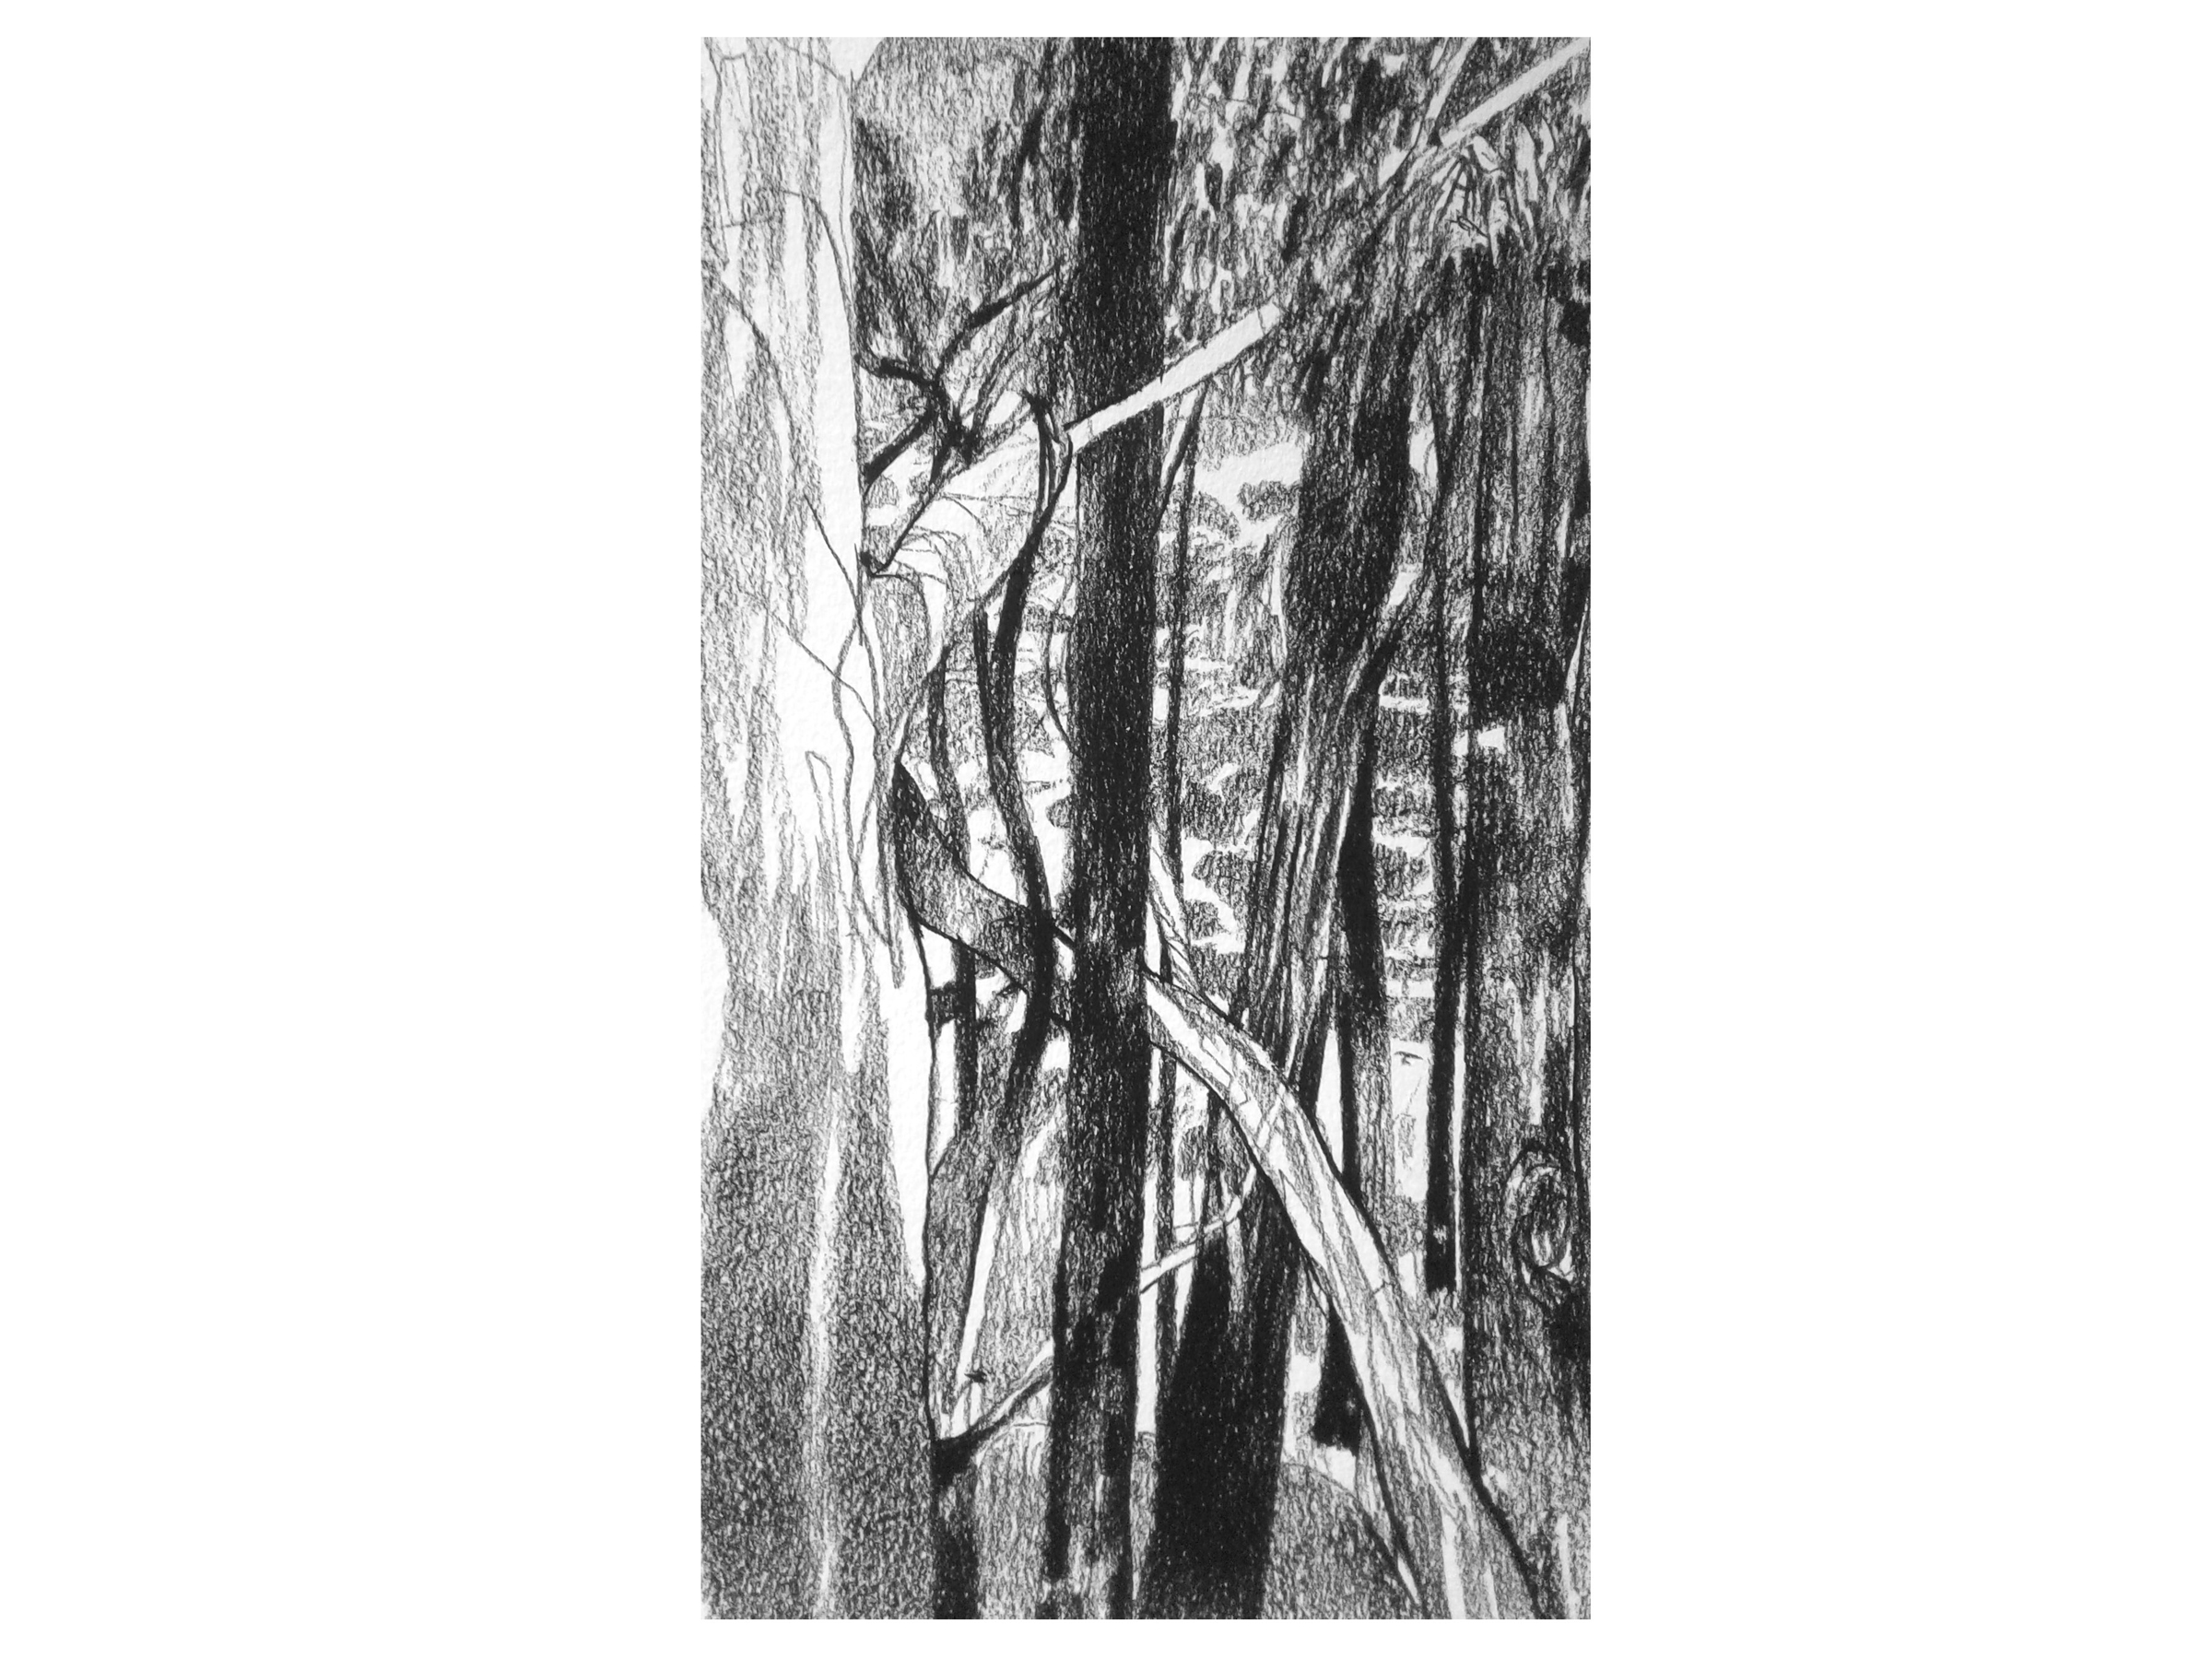 Ben Crappsley, Donnelly River Study #2